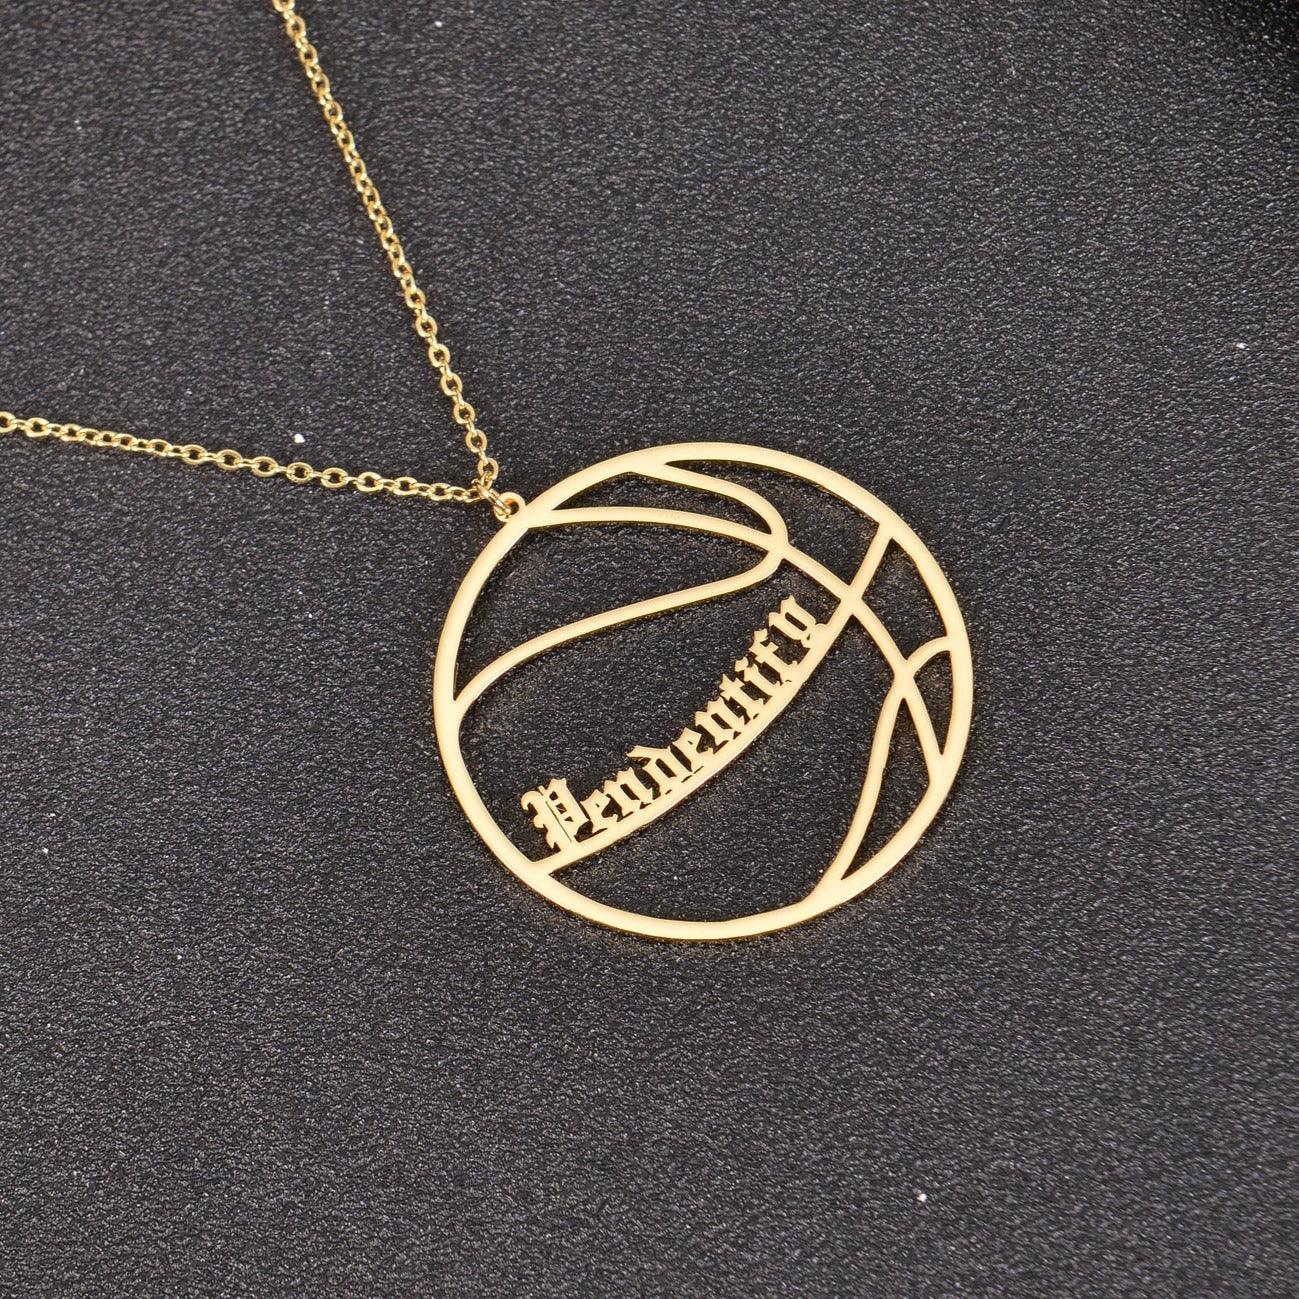 Personalized Basketball Necklace in Stainless Steel Custom Any Name and  Number for Men,Boys | Amazon.com